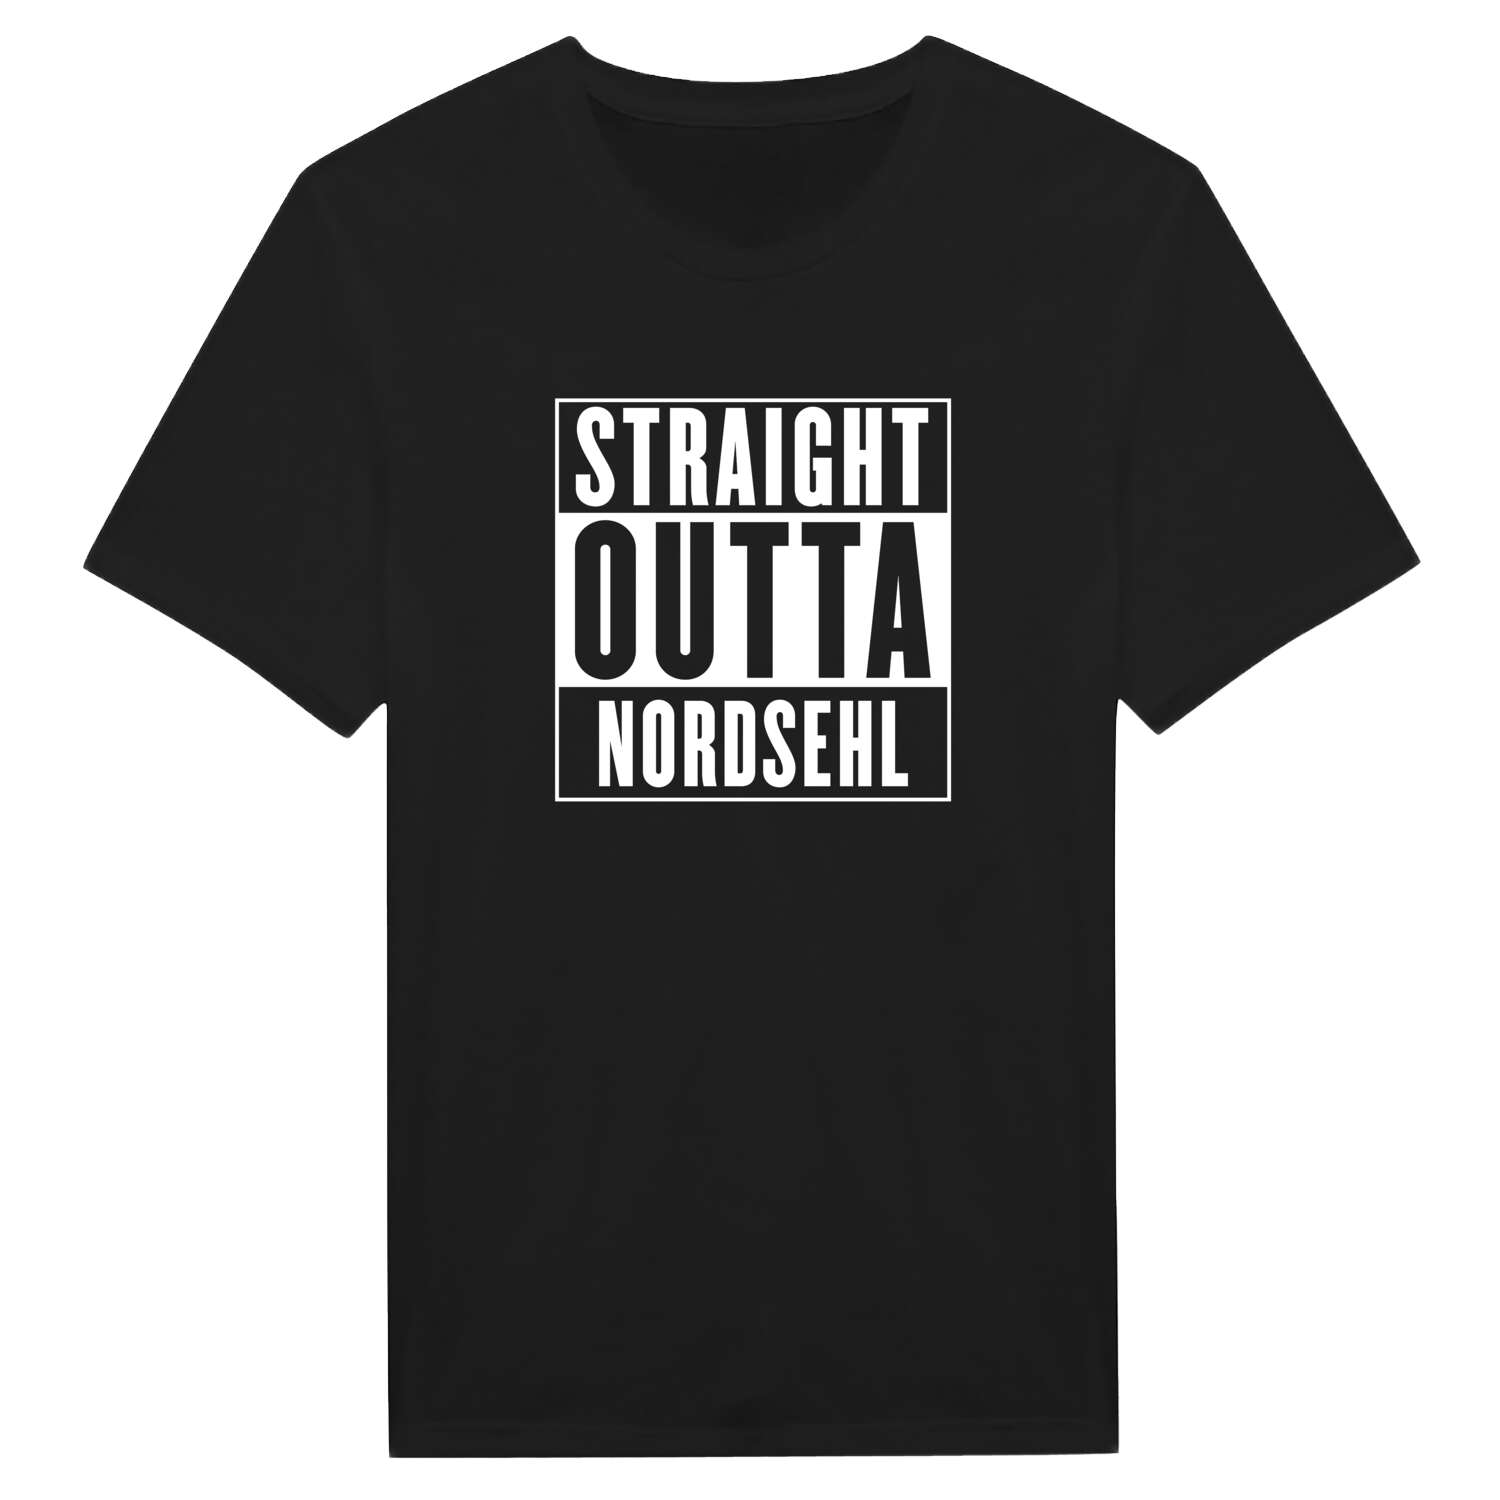 Nordsehl T-Shirt »Straight Outta«